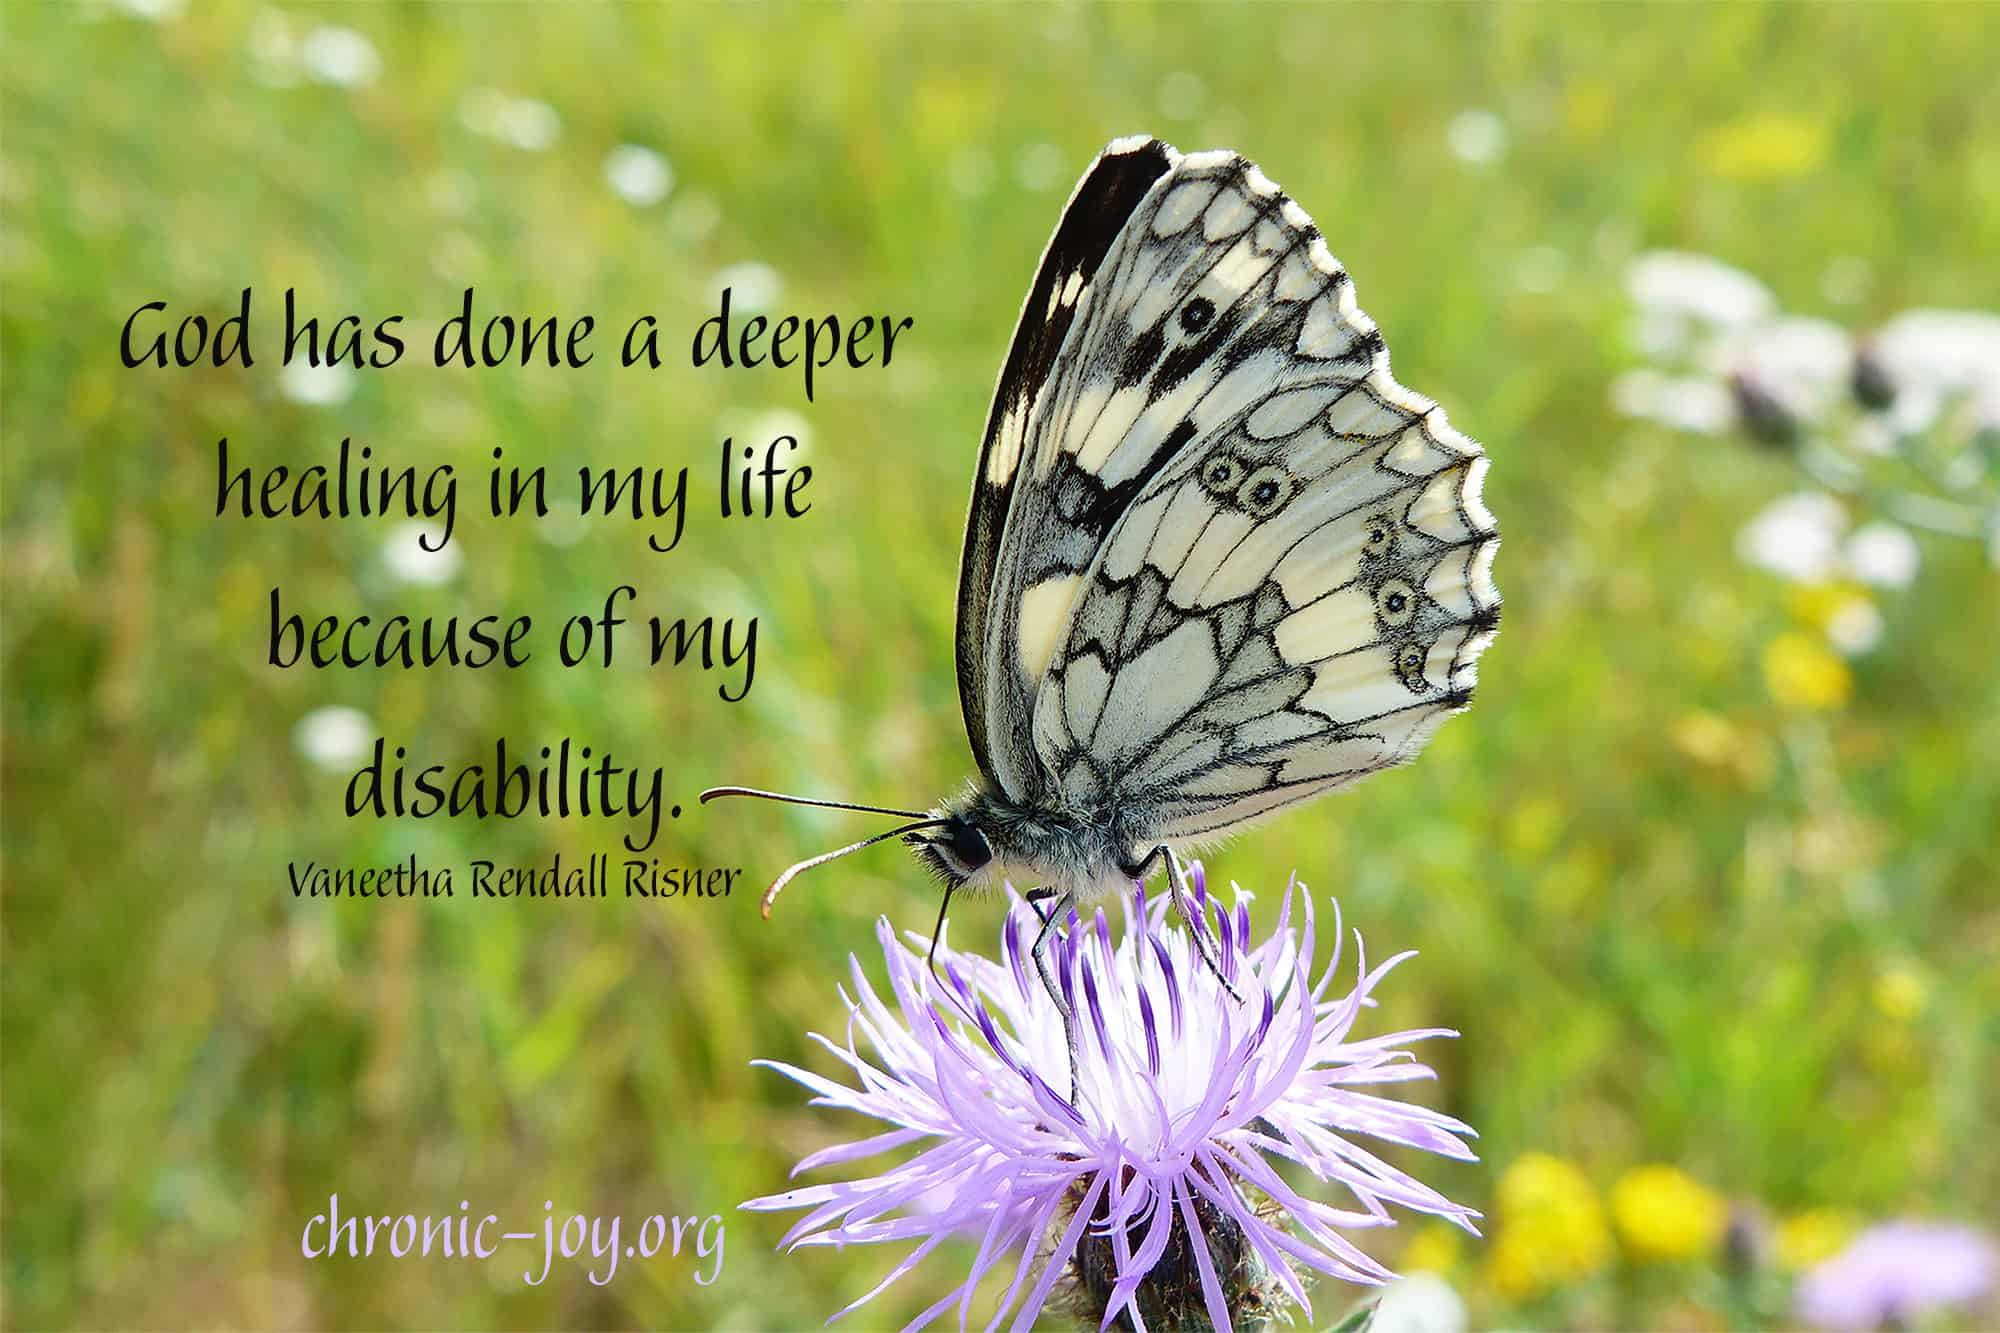 God has done a deeper healing in my life because of my disability. ~ Vaneetha Rendall Risner